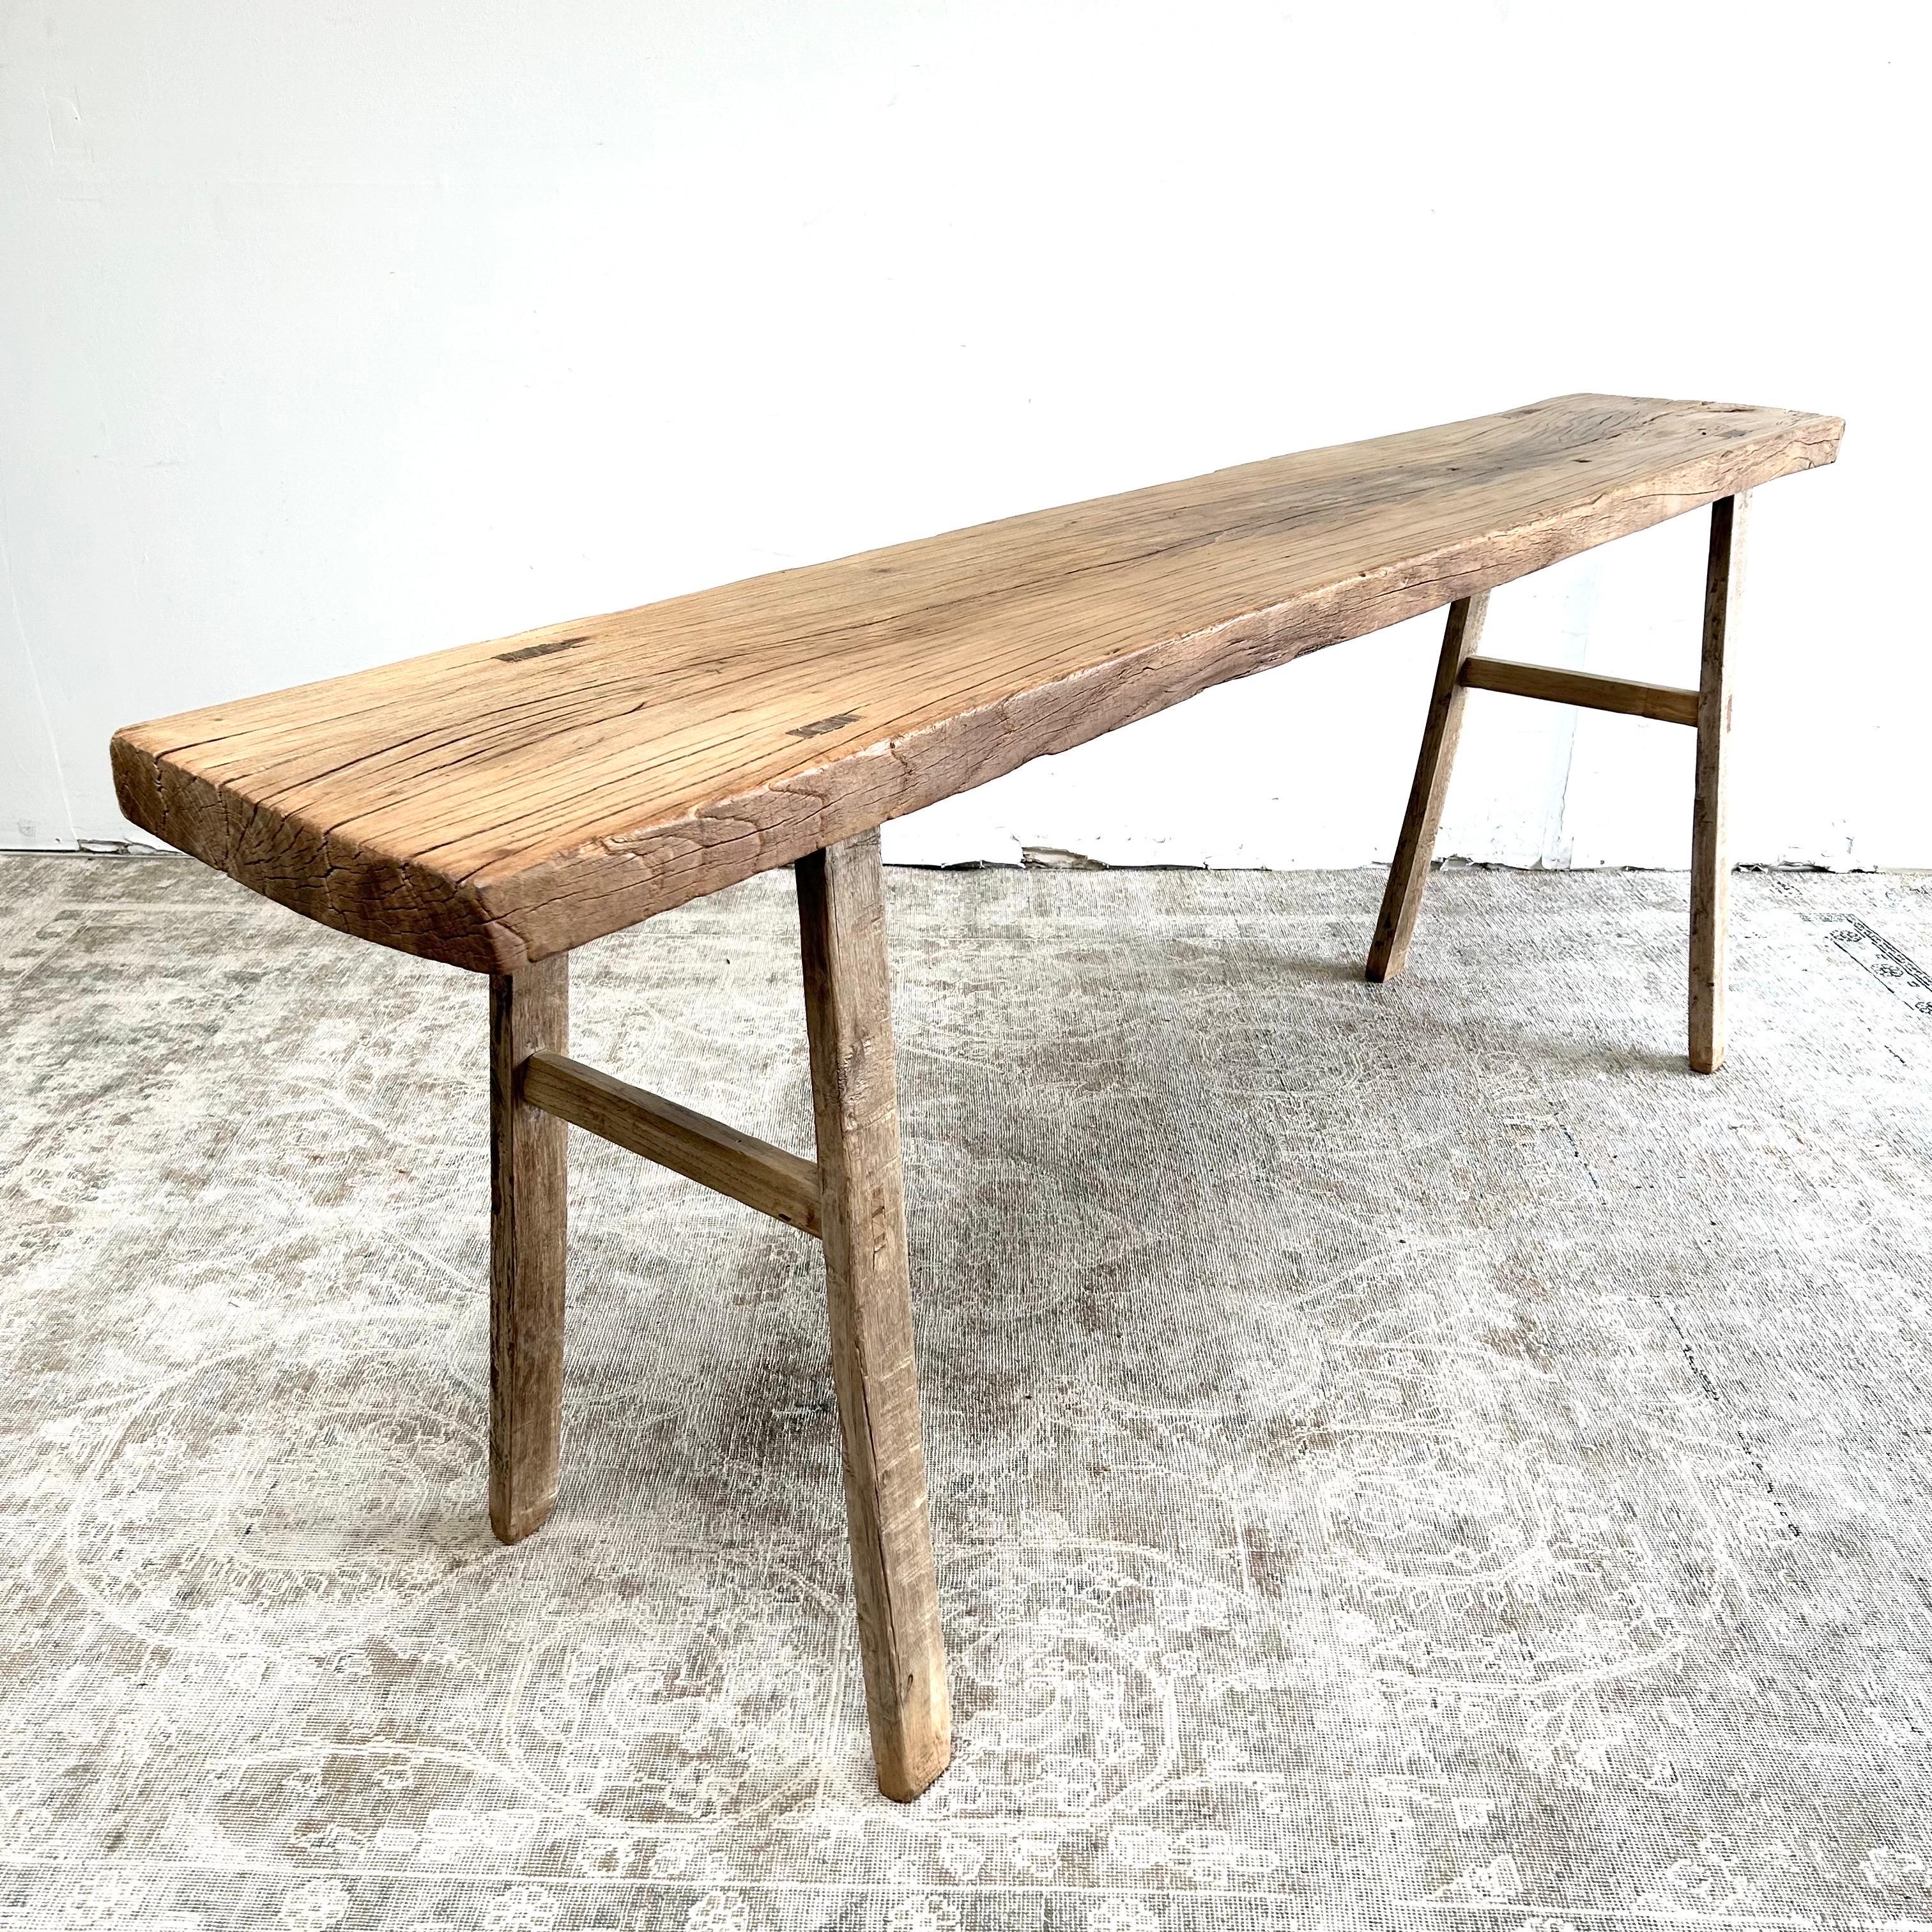 Vintage antique elm wood console table Made from Vintage reclaimed elm wood. Beautiful antique patina, with weathering and age, these are solid and sturdy ready for daily use, use as an entry table, sofa table or console in a dining room. Great in a